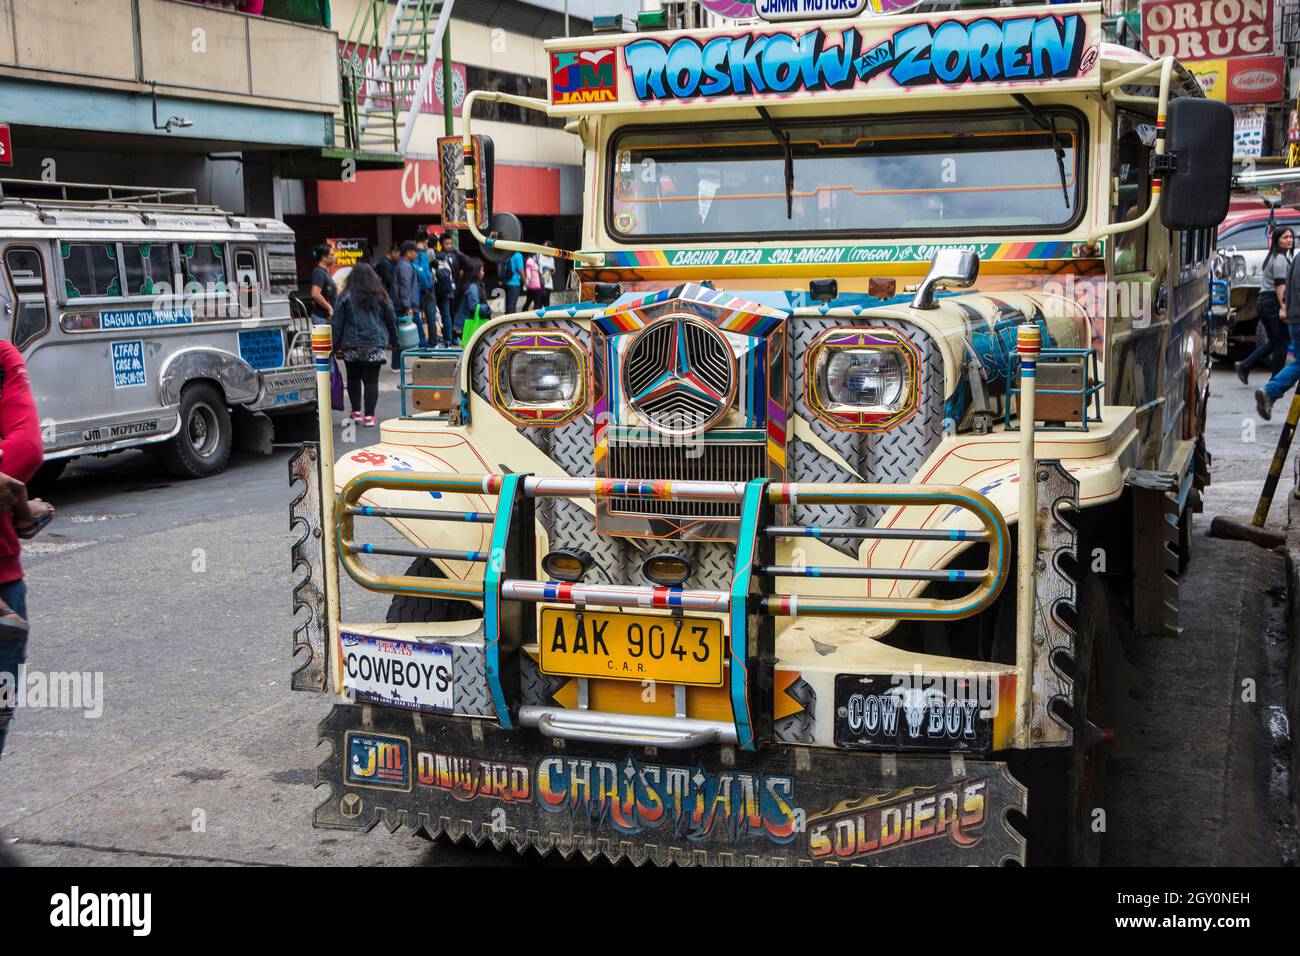 Front view of a colorful jeepney in the streets of Baguio city, Philippines. Stock Photo